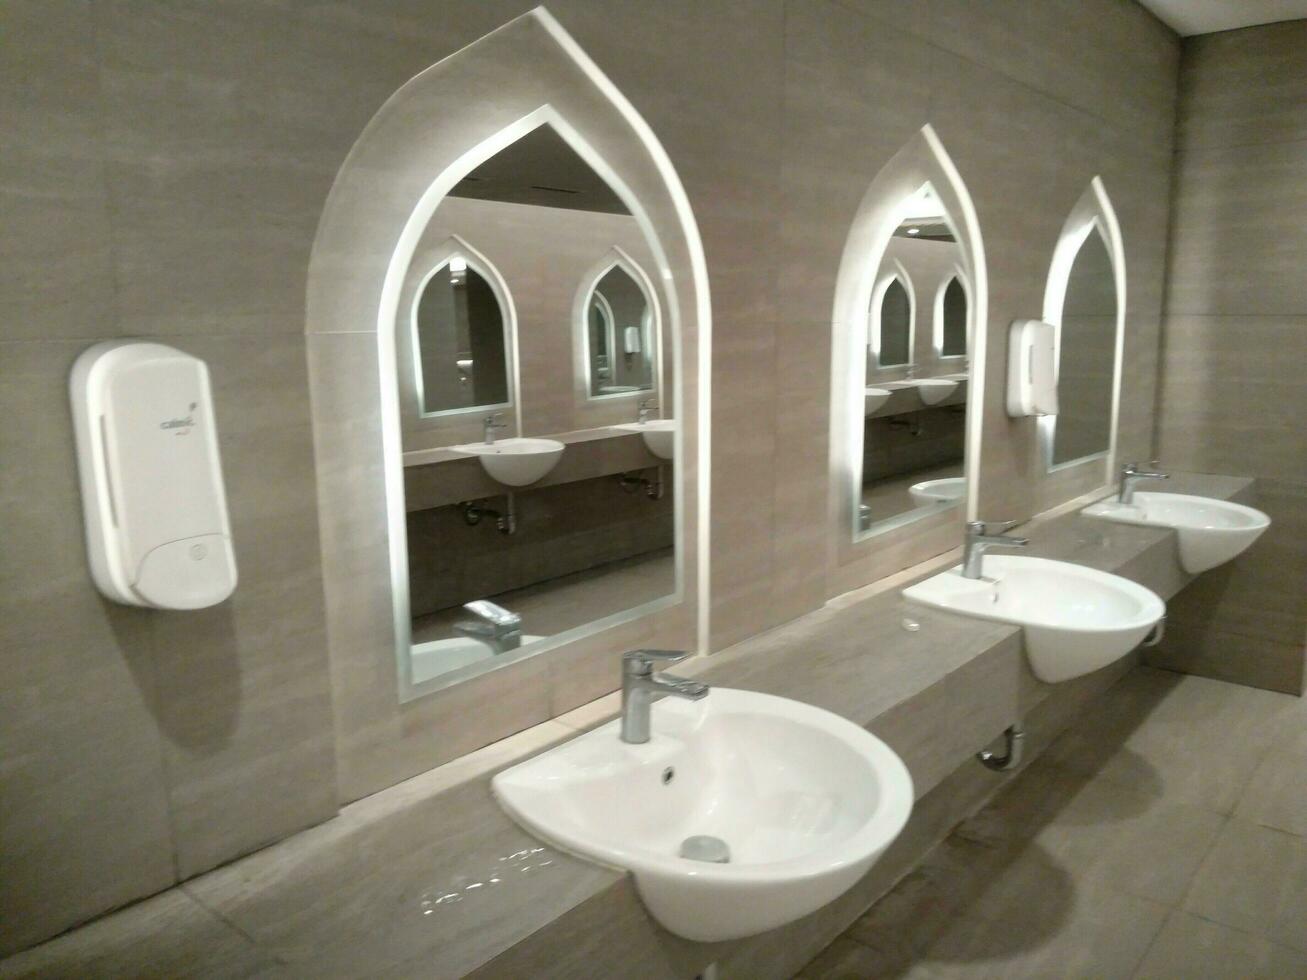 The ablution room in the mosque. The Wudu washroom photo